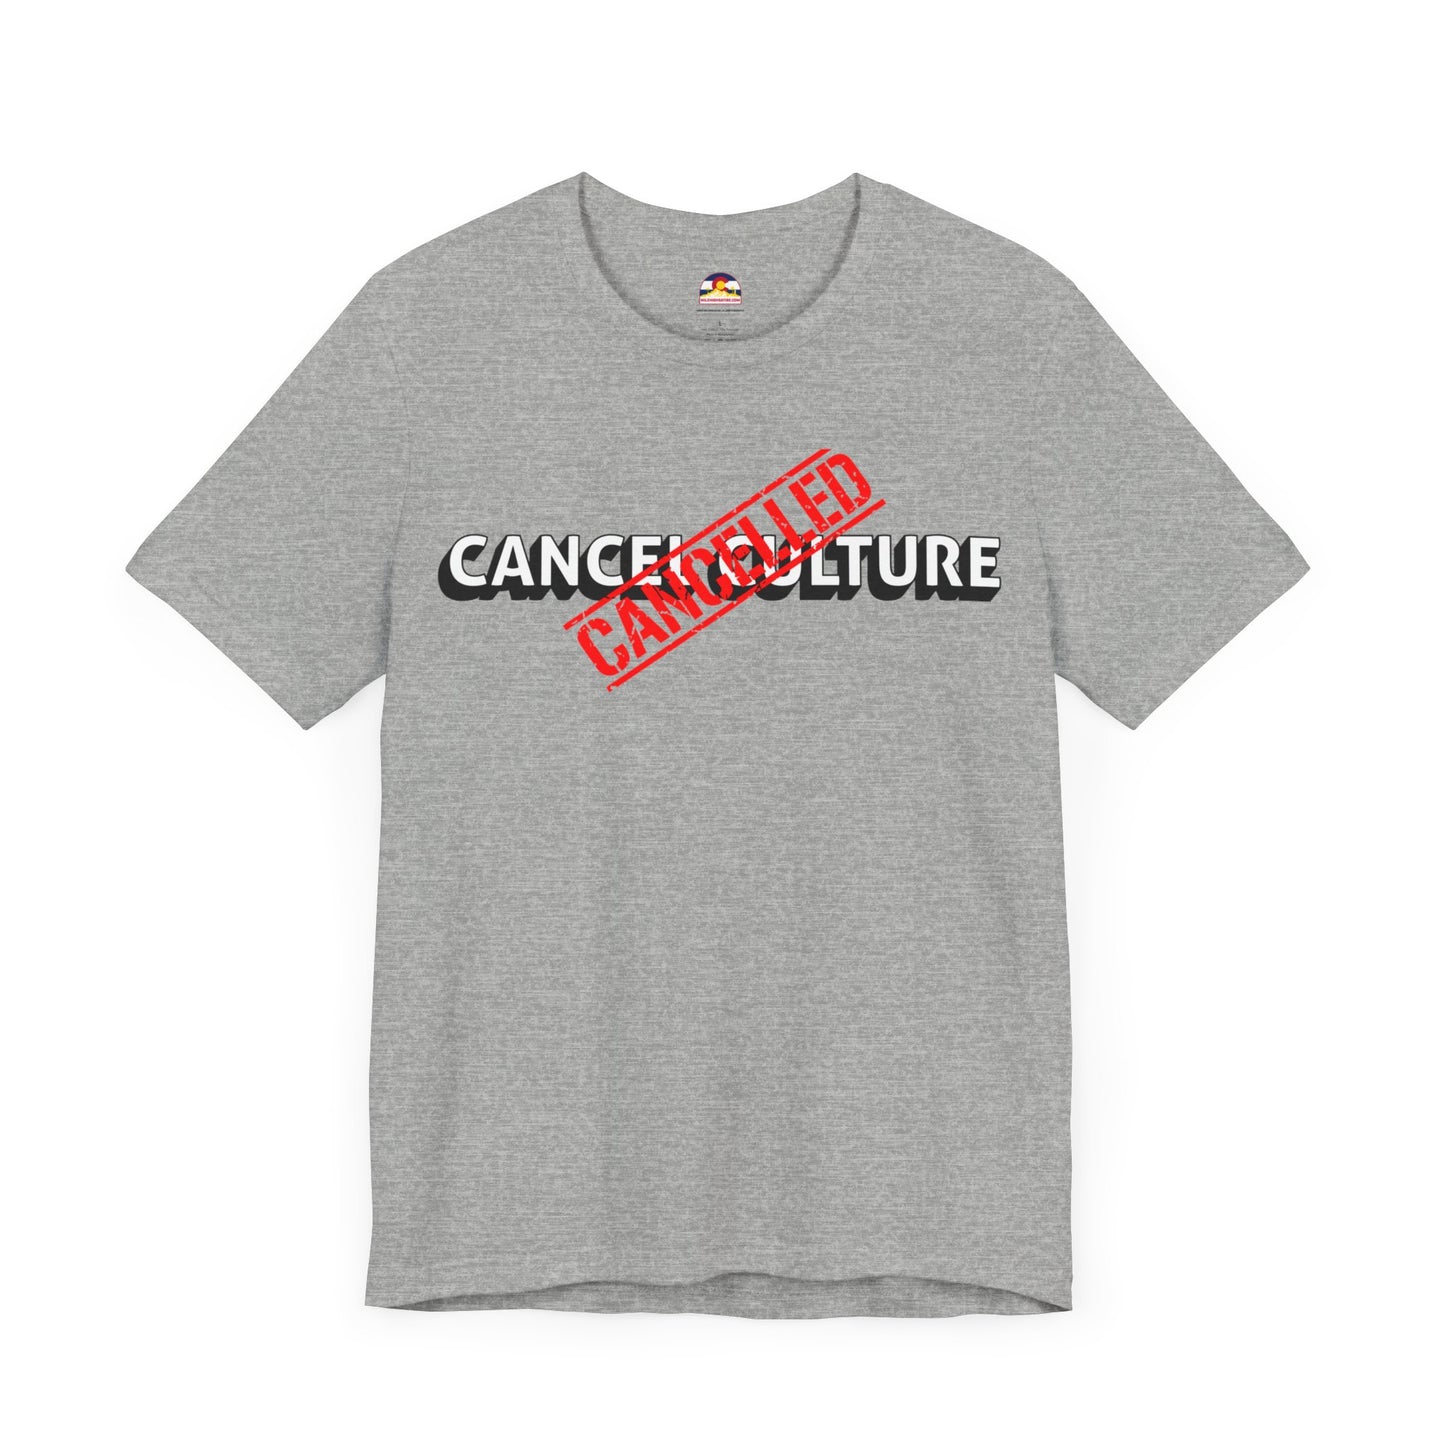 Cancel Culture is Cancelled T-Shirt